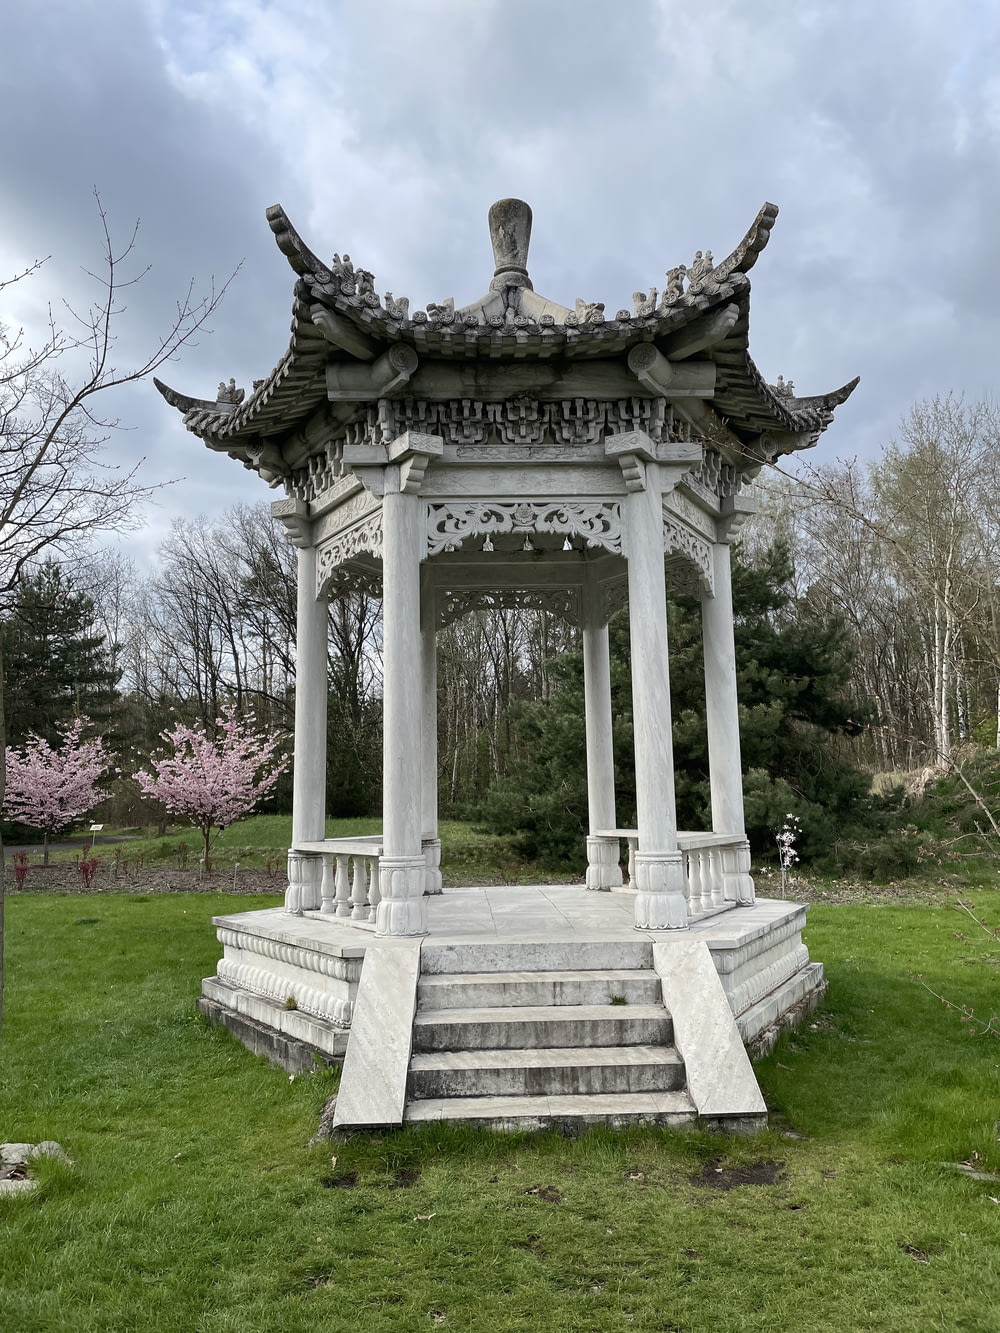 a gazebo in a park with steps leading up to it